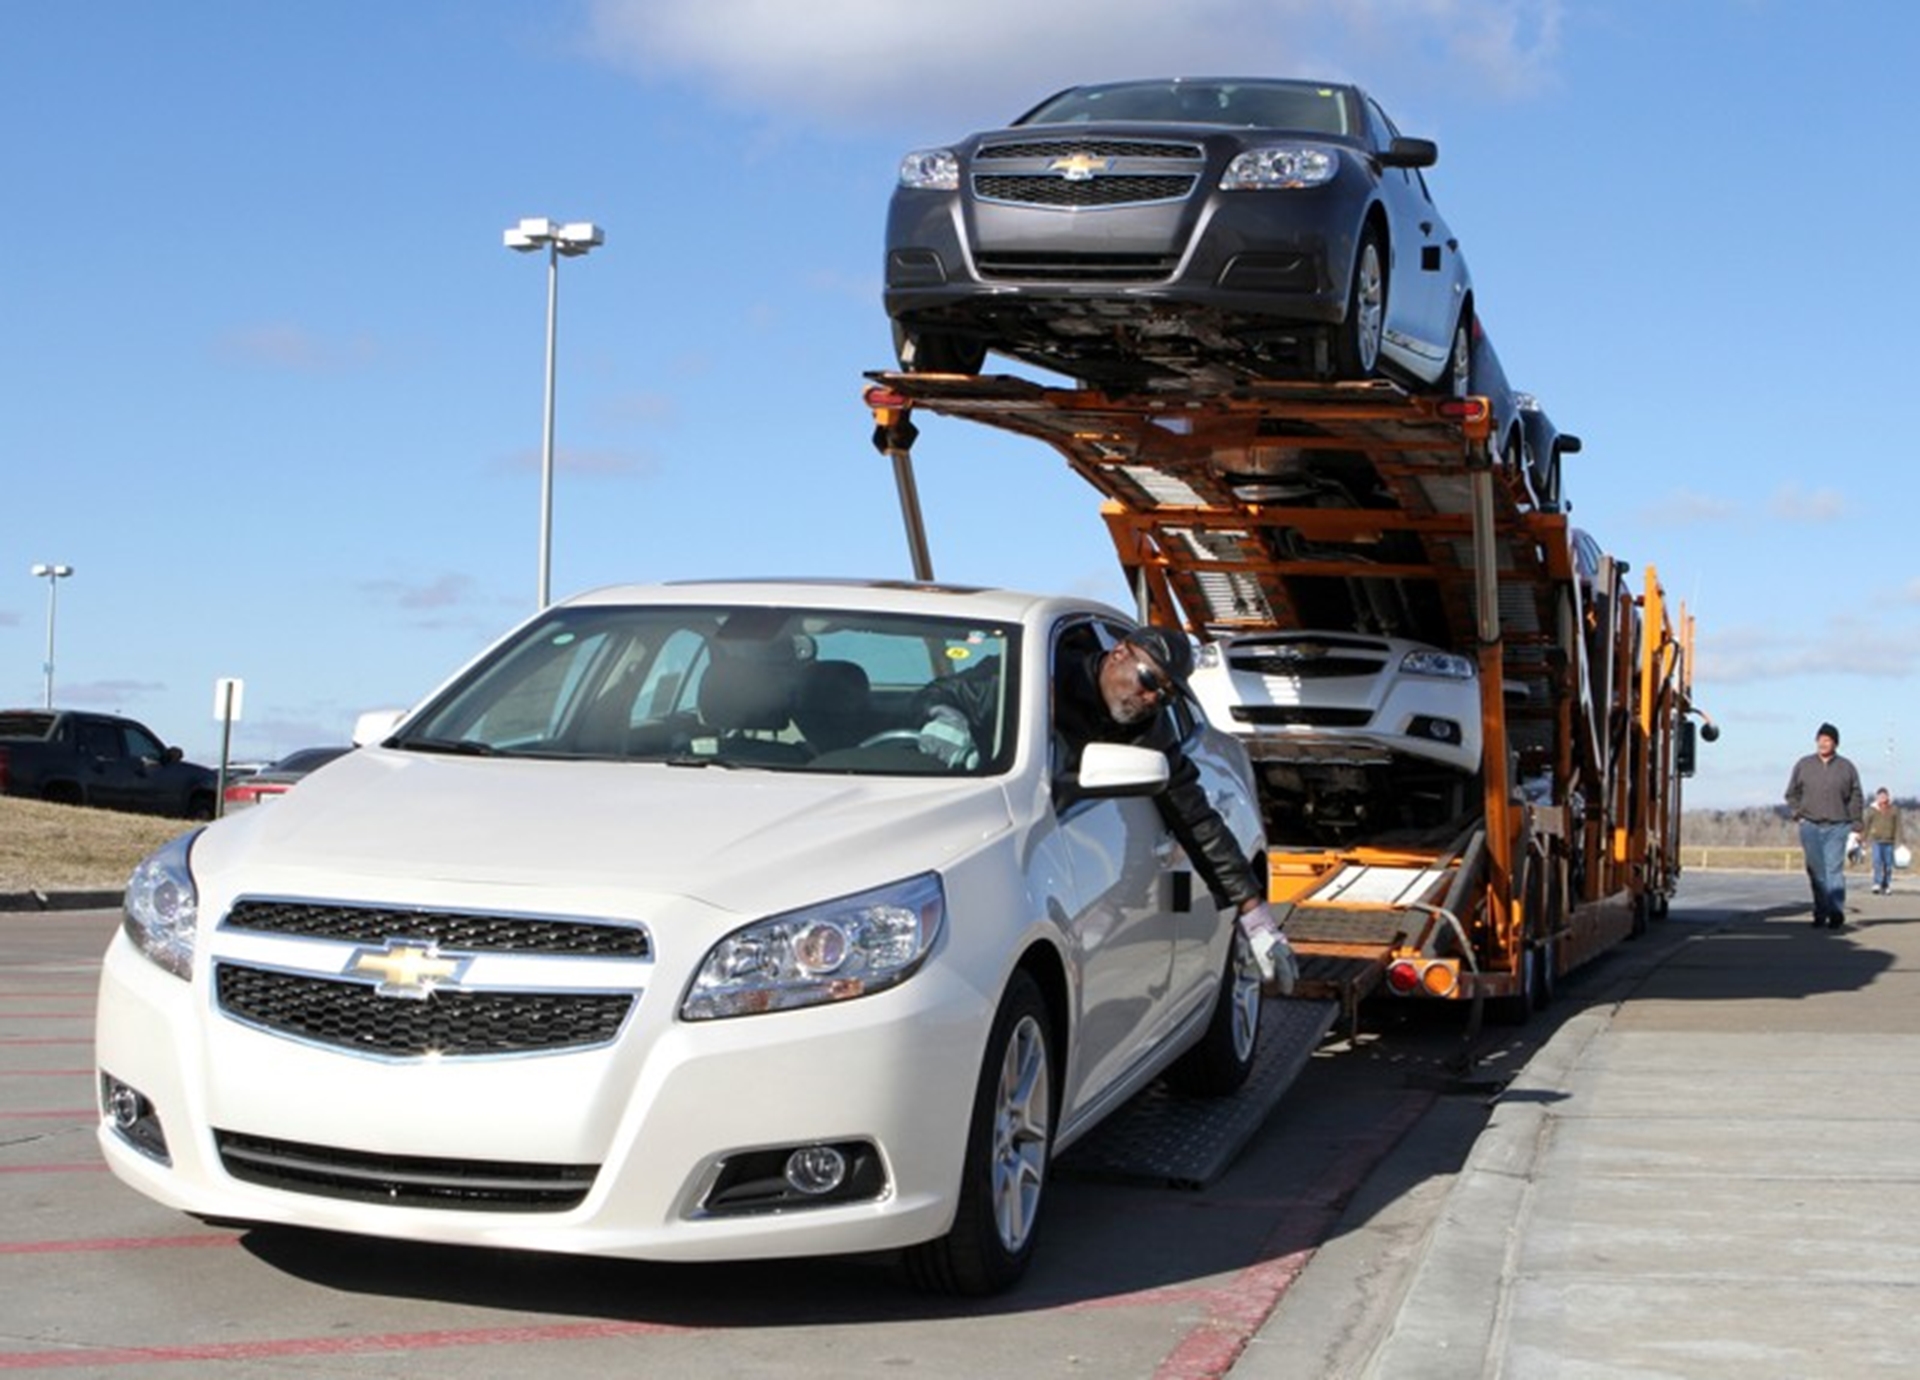 Global Launch of 2013 Chevrolet Malibu Continues